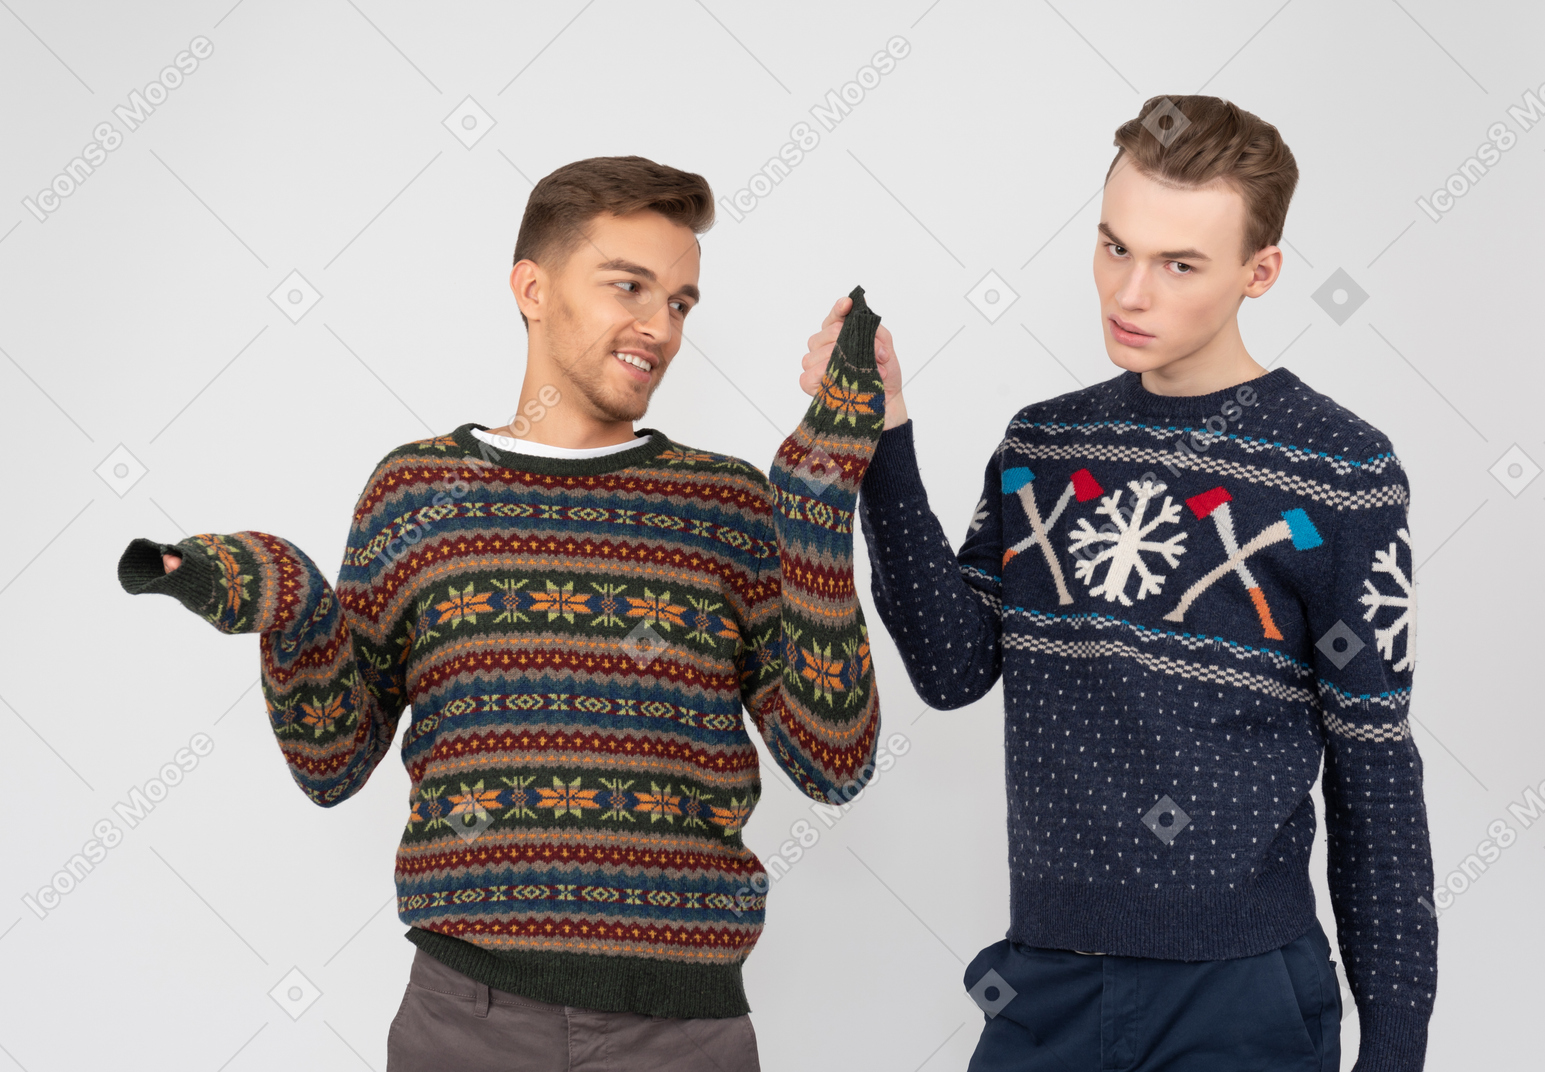 Brother trying to take off his brother's sweater